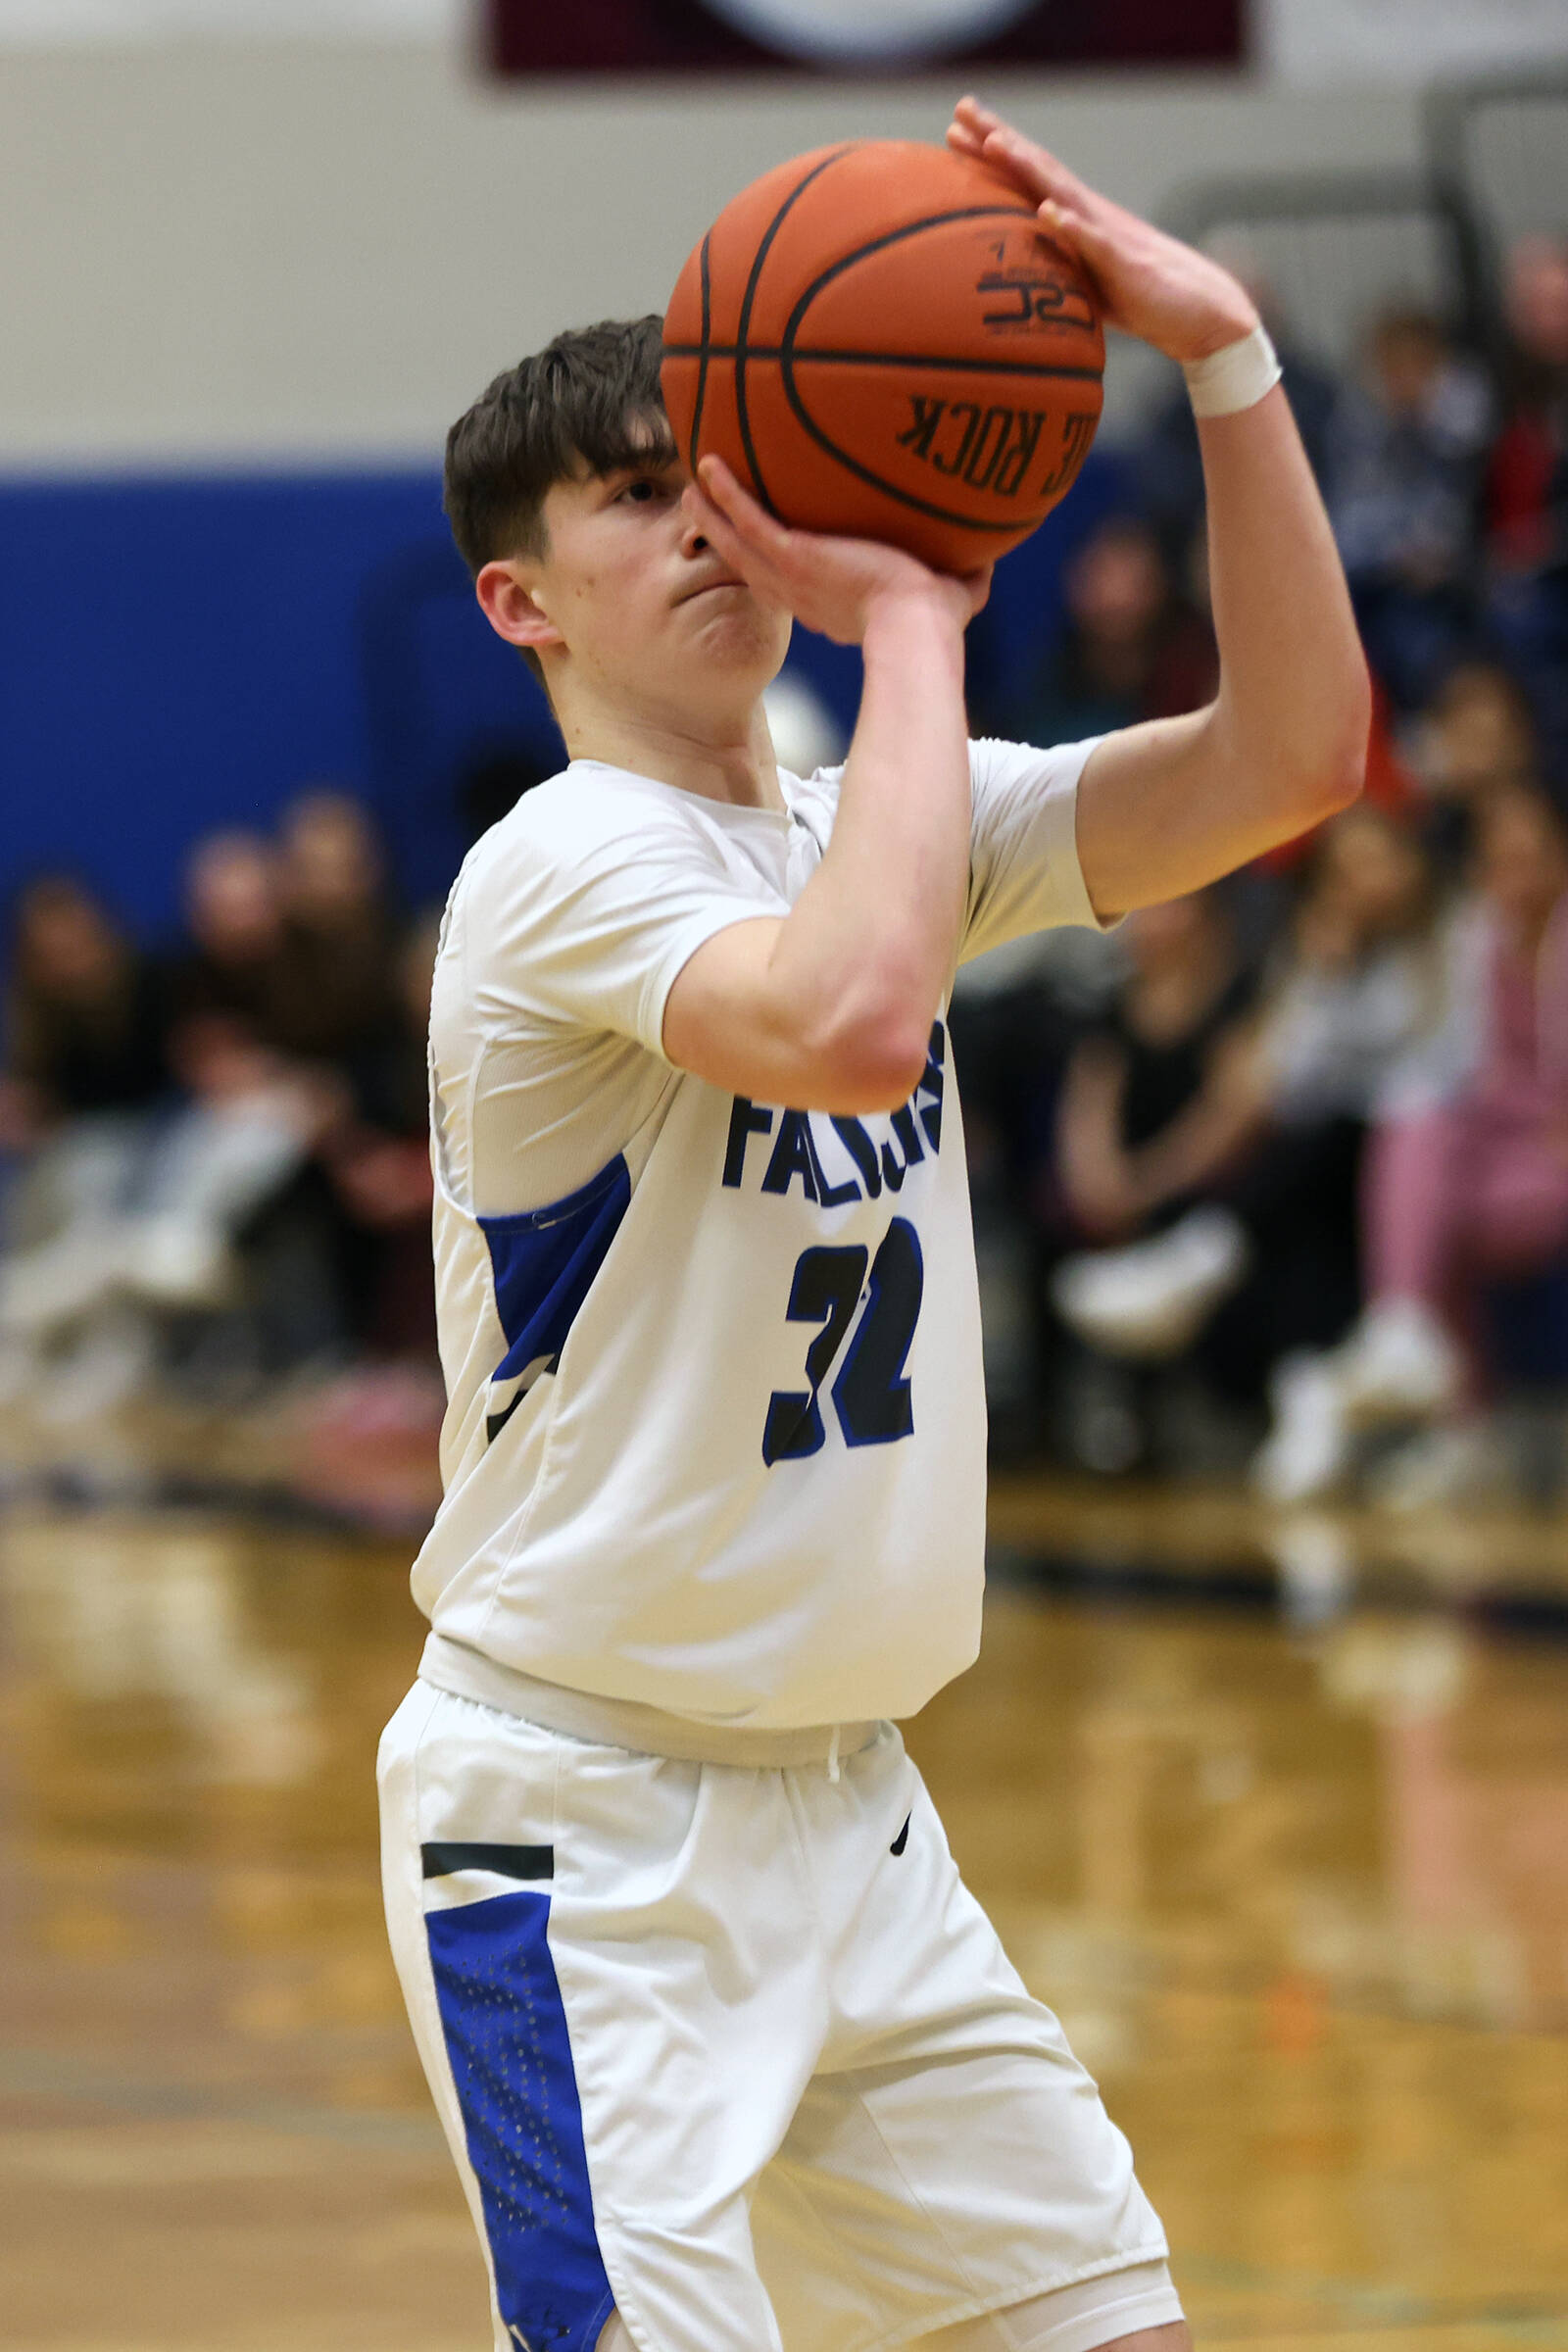 TMHS junior Samuel Lockhart dons a larger teammate's jersey while knocking down a free throw late in a home win against Ketchikan. (Ben Hohenstatt / Juneau Empire)